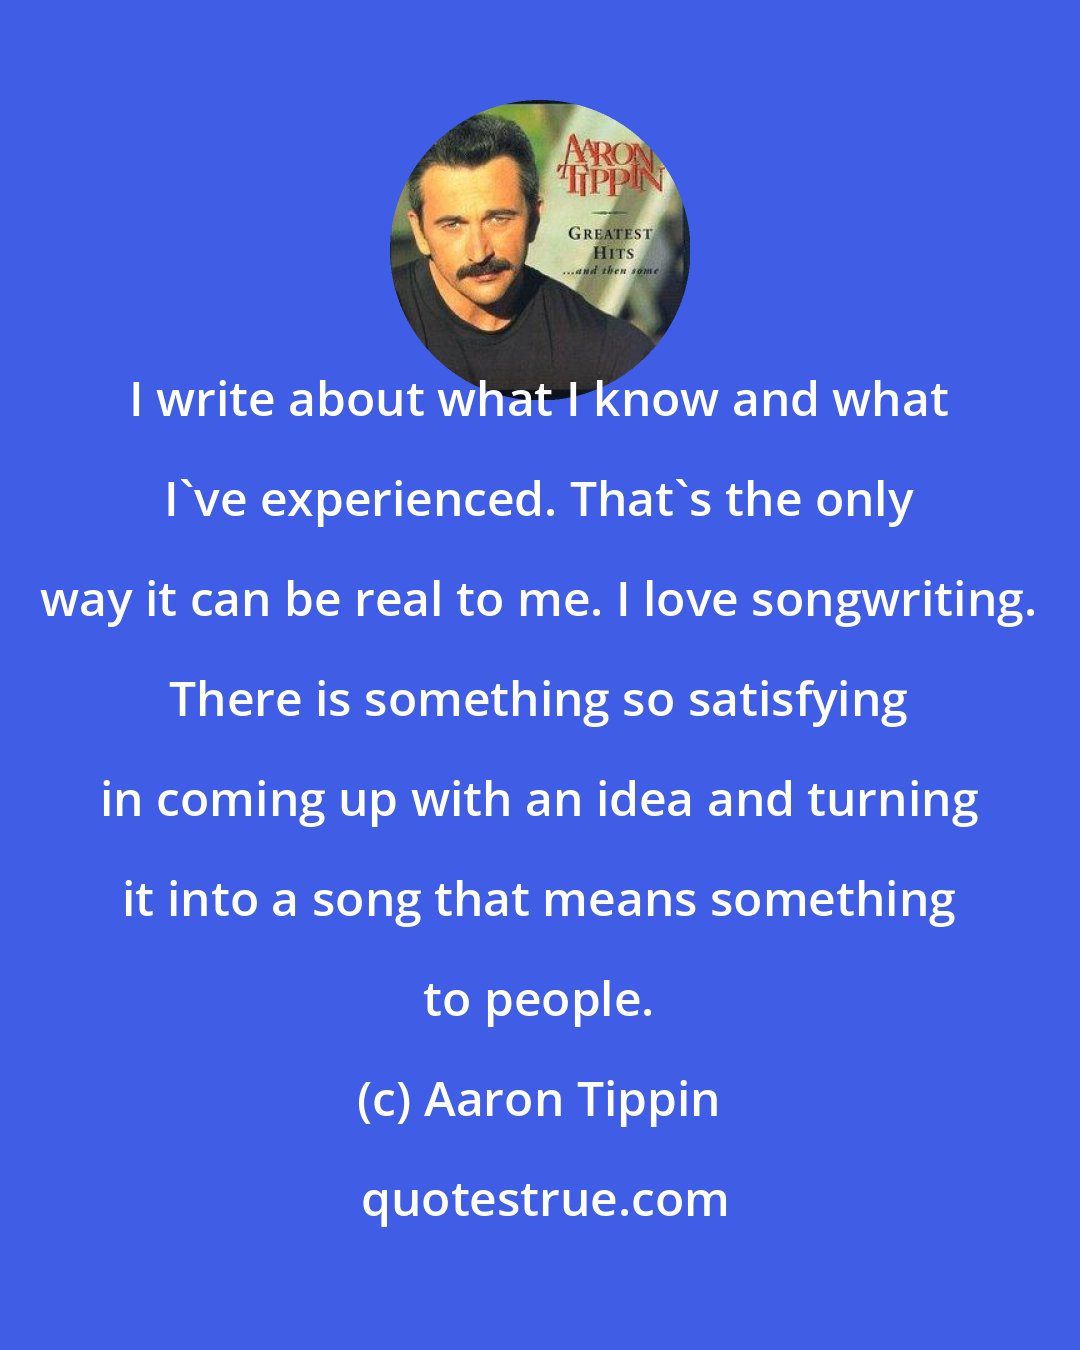 Aaron Tippin: I write about what I know and what I've experienced. That's the only way it can be real to me. I love songwriting. There is something so satisfying in coming up with an idea and turning it into a song that means something to people.